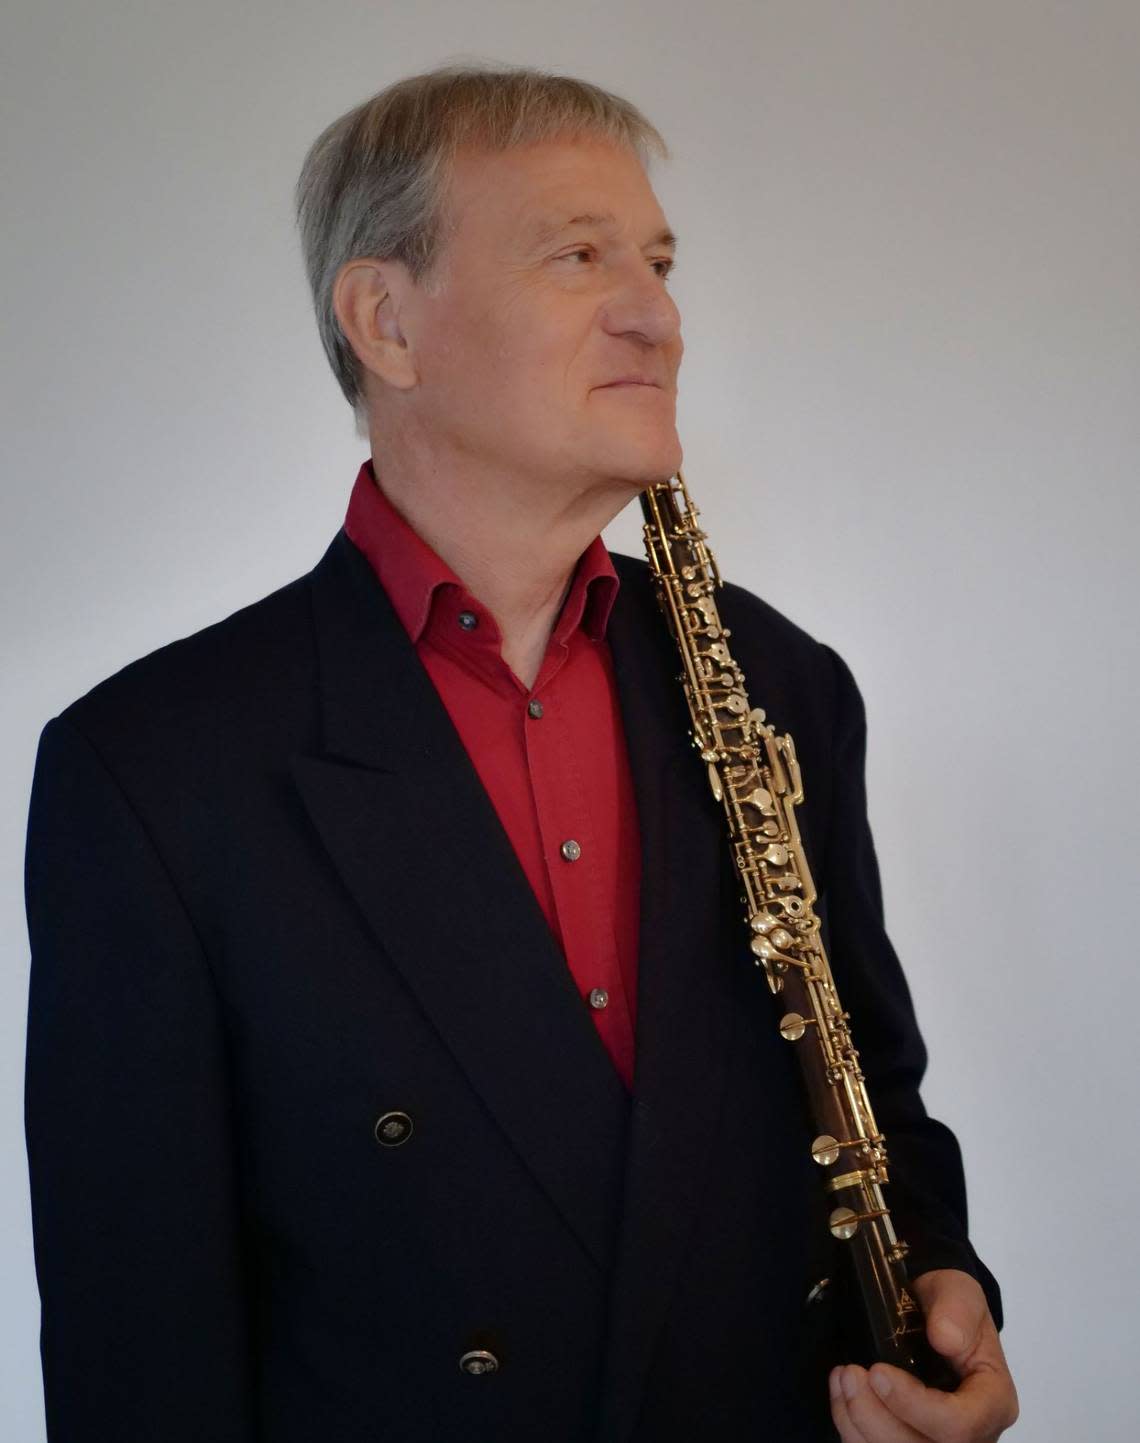 Renowned oboist Hansjörg Schellenberger will give a recital at the 1900 Building on April 11.